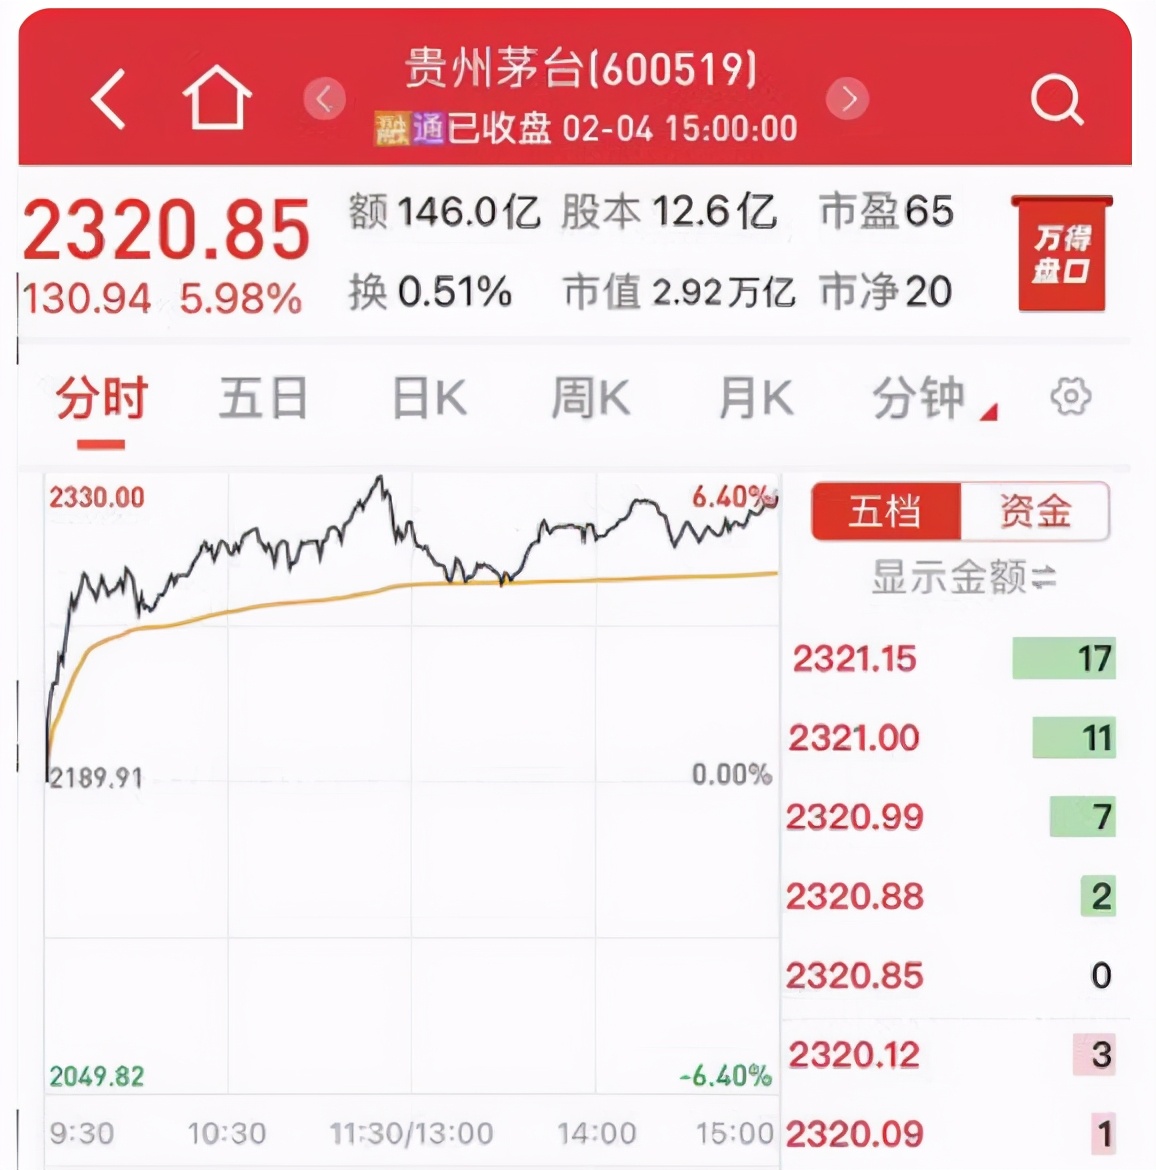 Share price exceeds 2300 yuan, does Maotai rise what to signal show fully rear? 